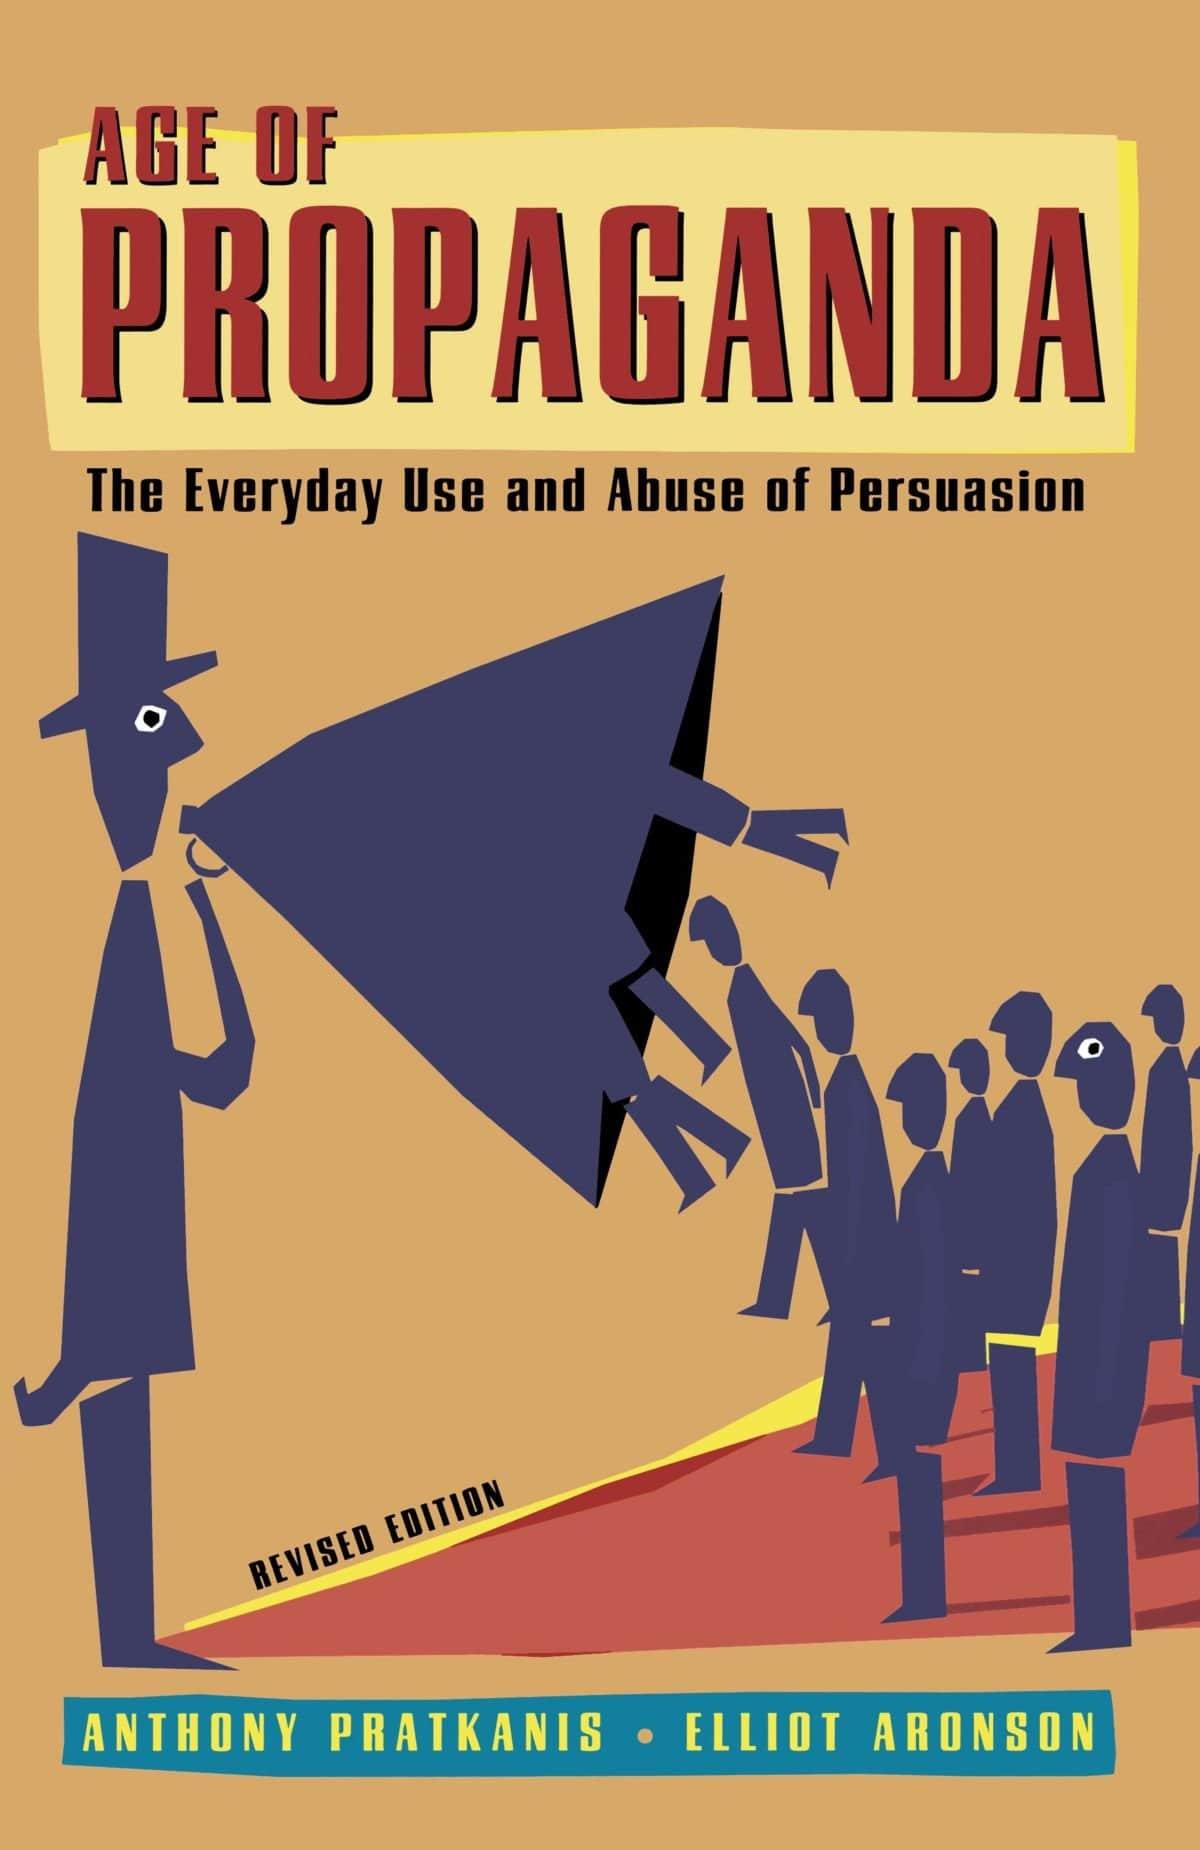 Age of Propaganda: The Everyday Use and Abuse of Persuasion - Booksondemand